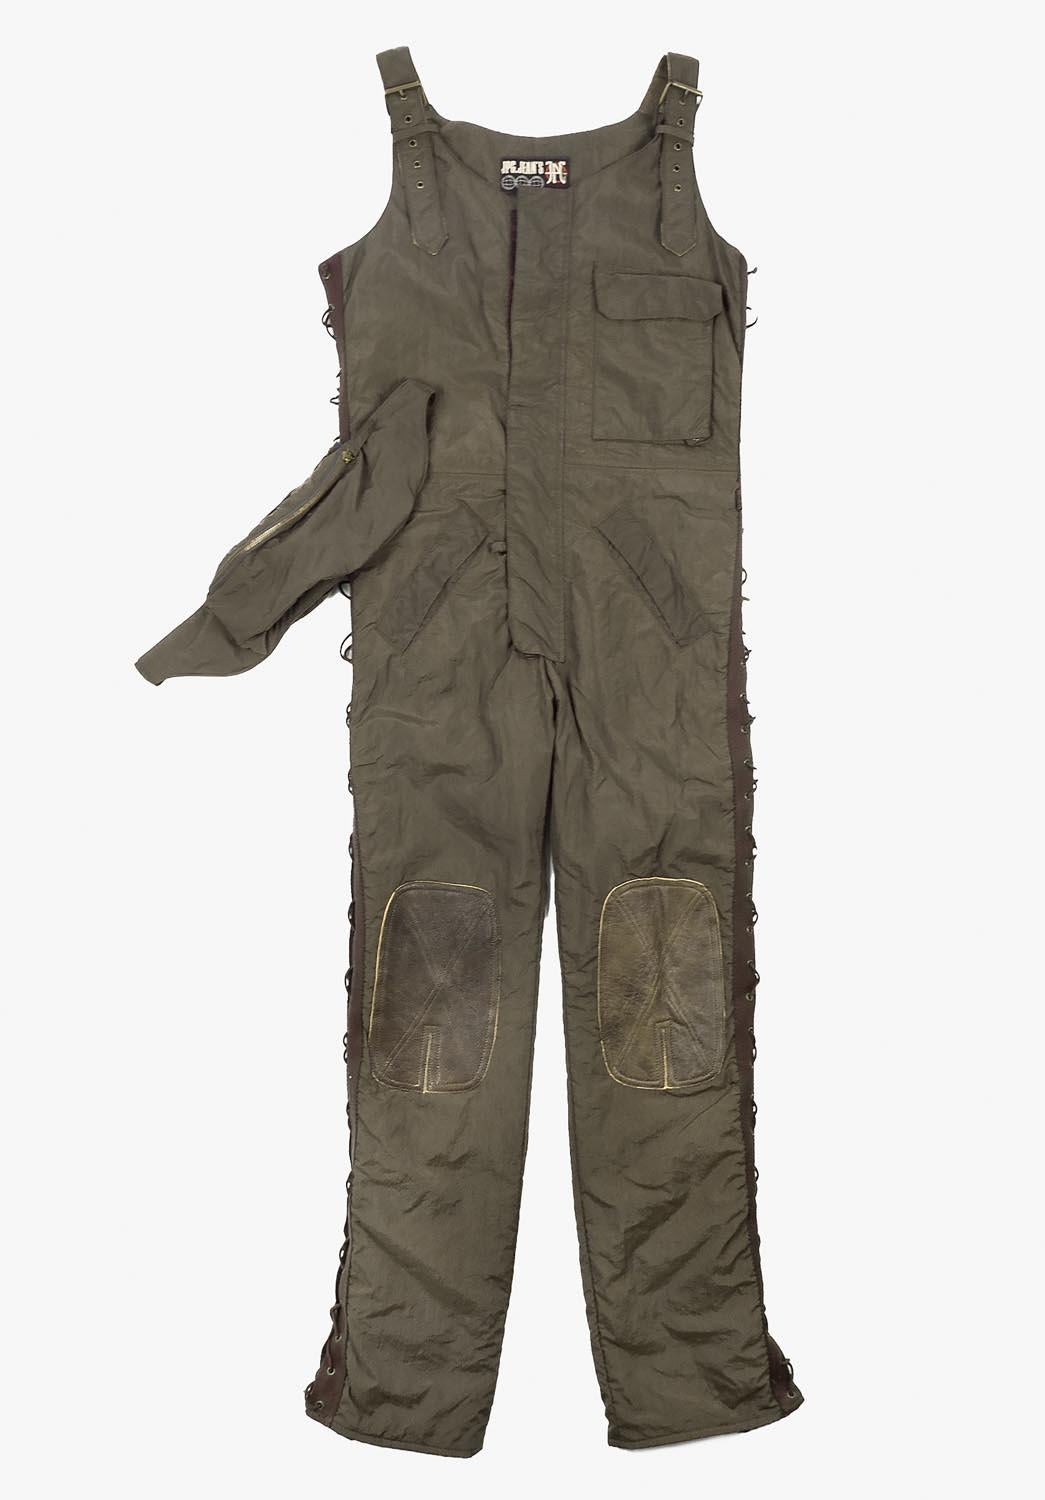 100% genuine Jean Paul Gaultier vintage military overall with waistbag, many details, nocode
Color: khaki
(An actual color may a bit vary due to individual computer screen interpretation)
Material: 100% nylon
Tag size: ITA48, Large
These pants are